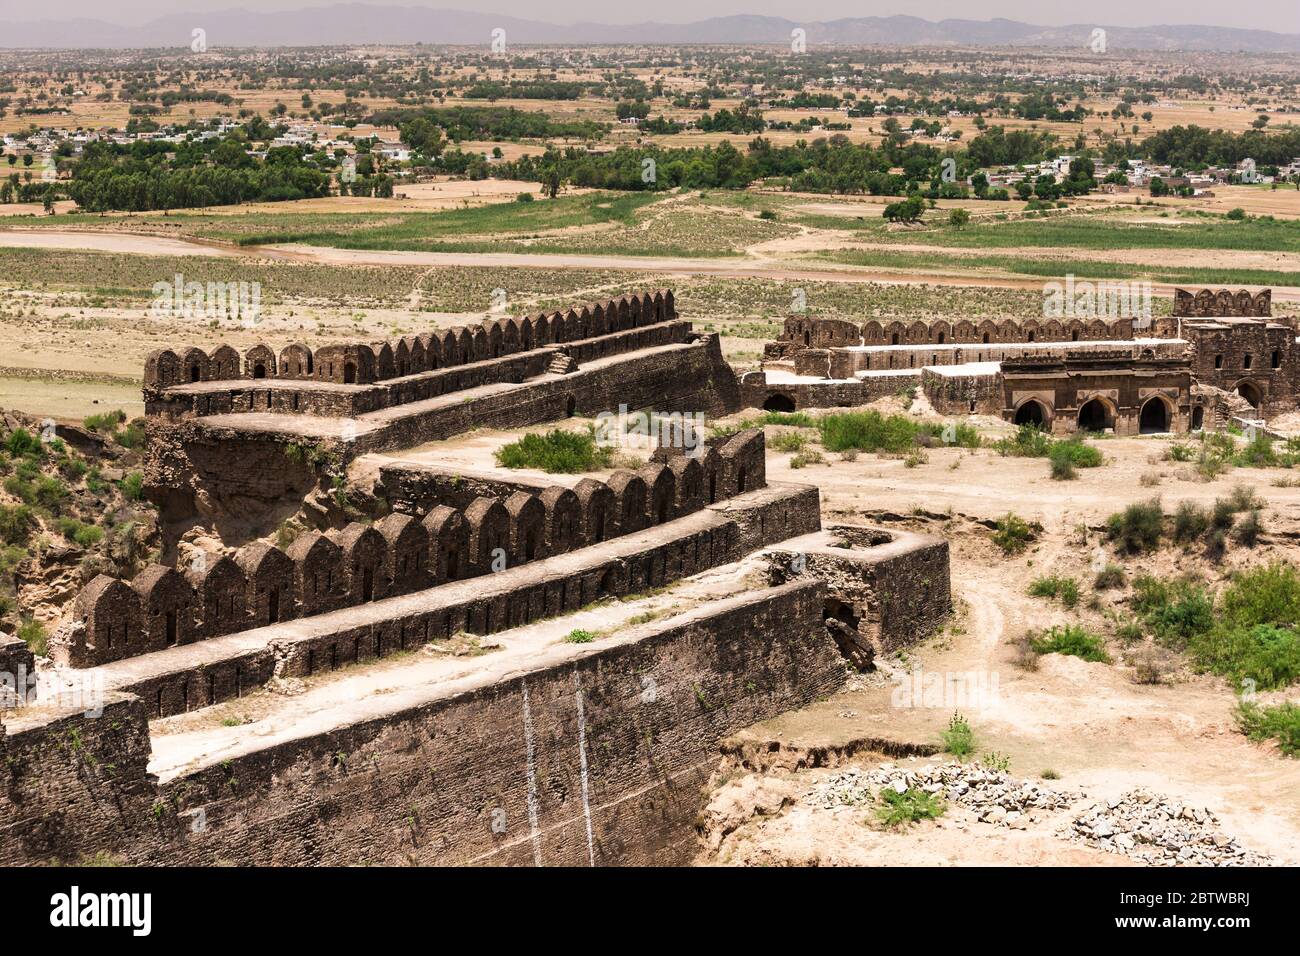 Rohtas Fort, Courtyard of Fort, Jhelum District, Punjab Province, Pakistan, South Asia, Asia Stock Photo